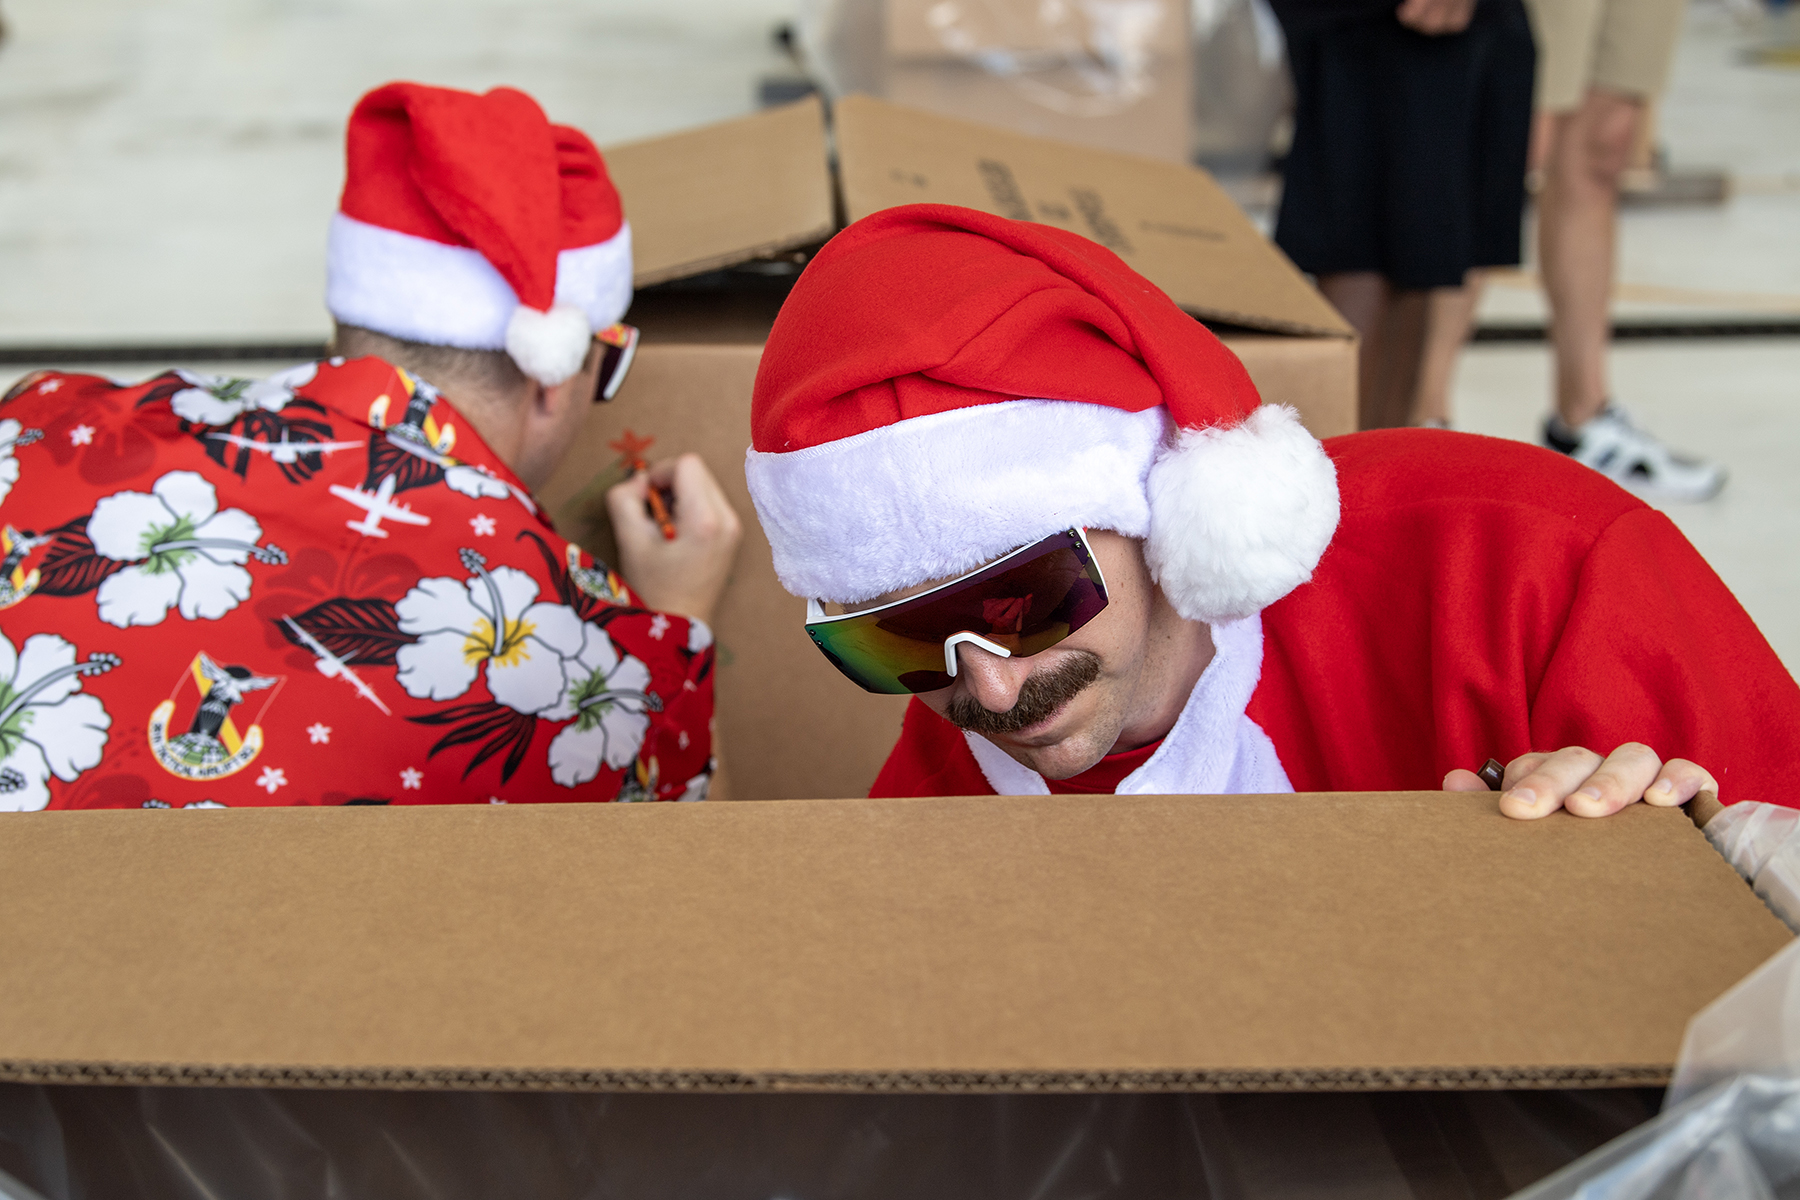 Two service members wearing Santa hats crouch while coloring on cardboard boxes.